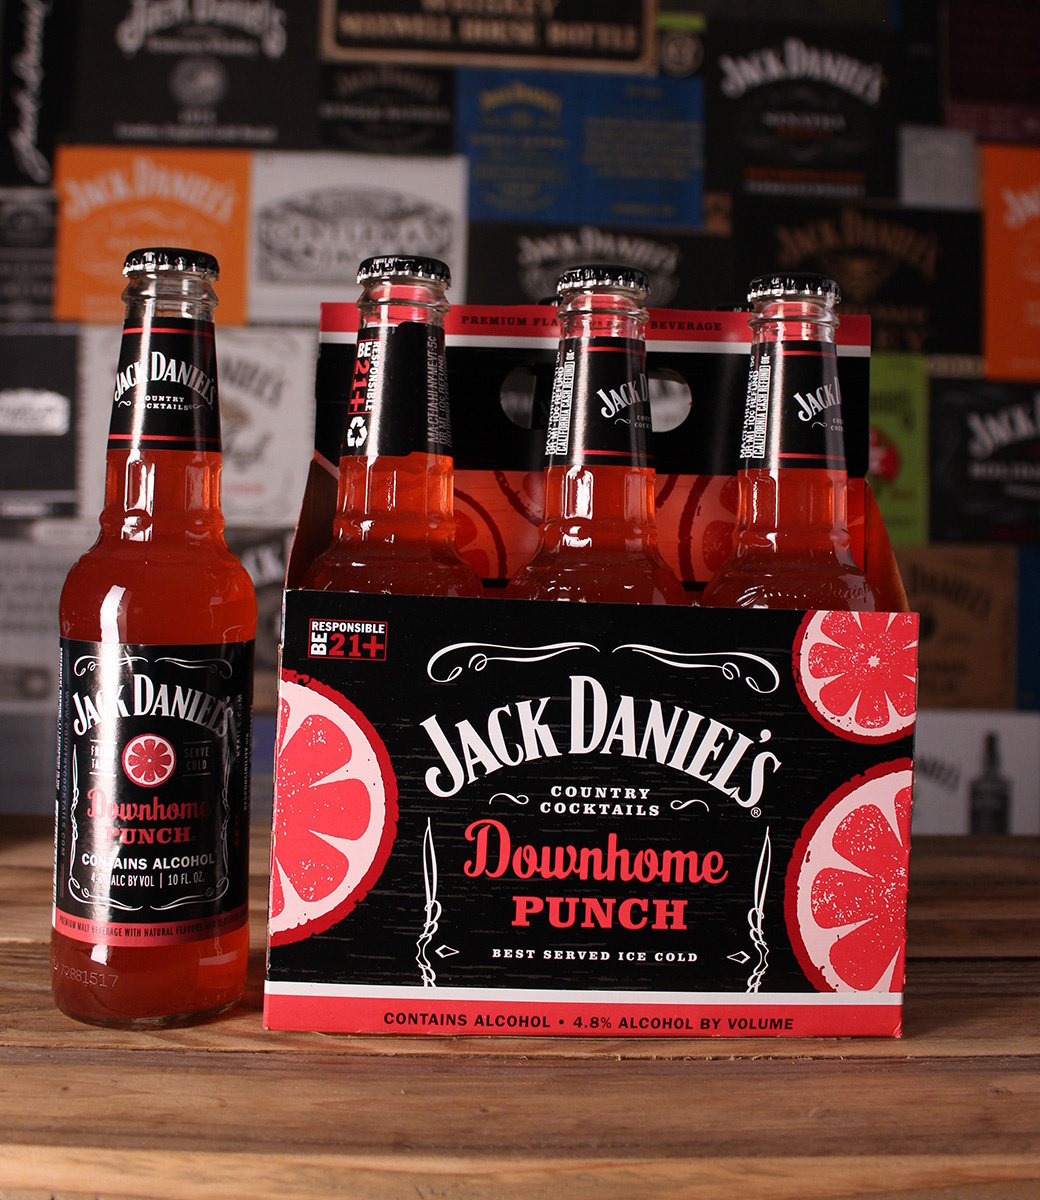 JACK DANIEL'S - Country Cocktails - Downhome Punch - 1 Bottle